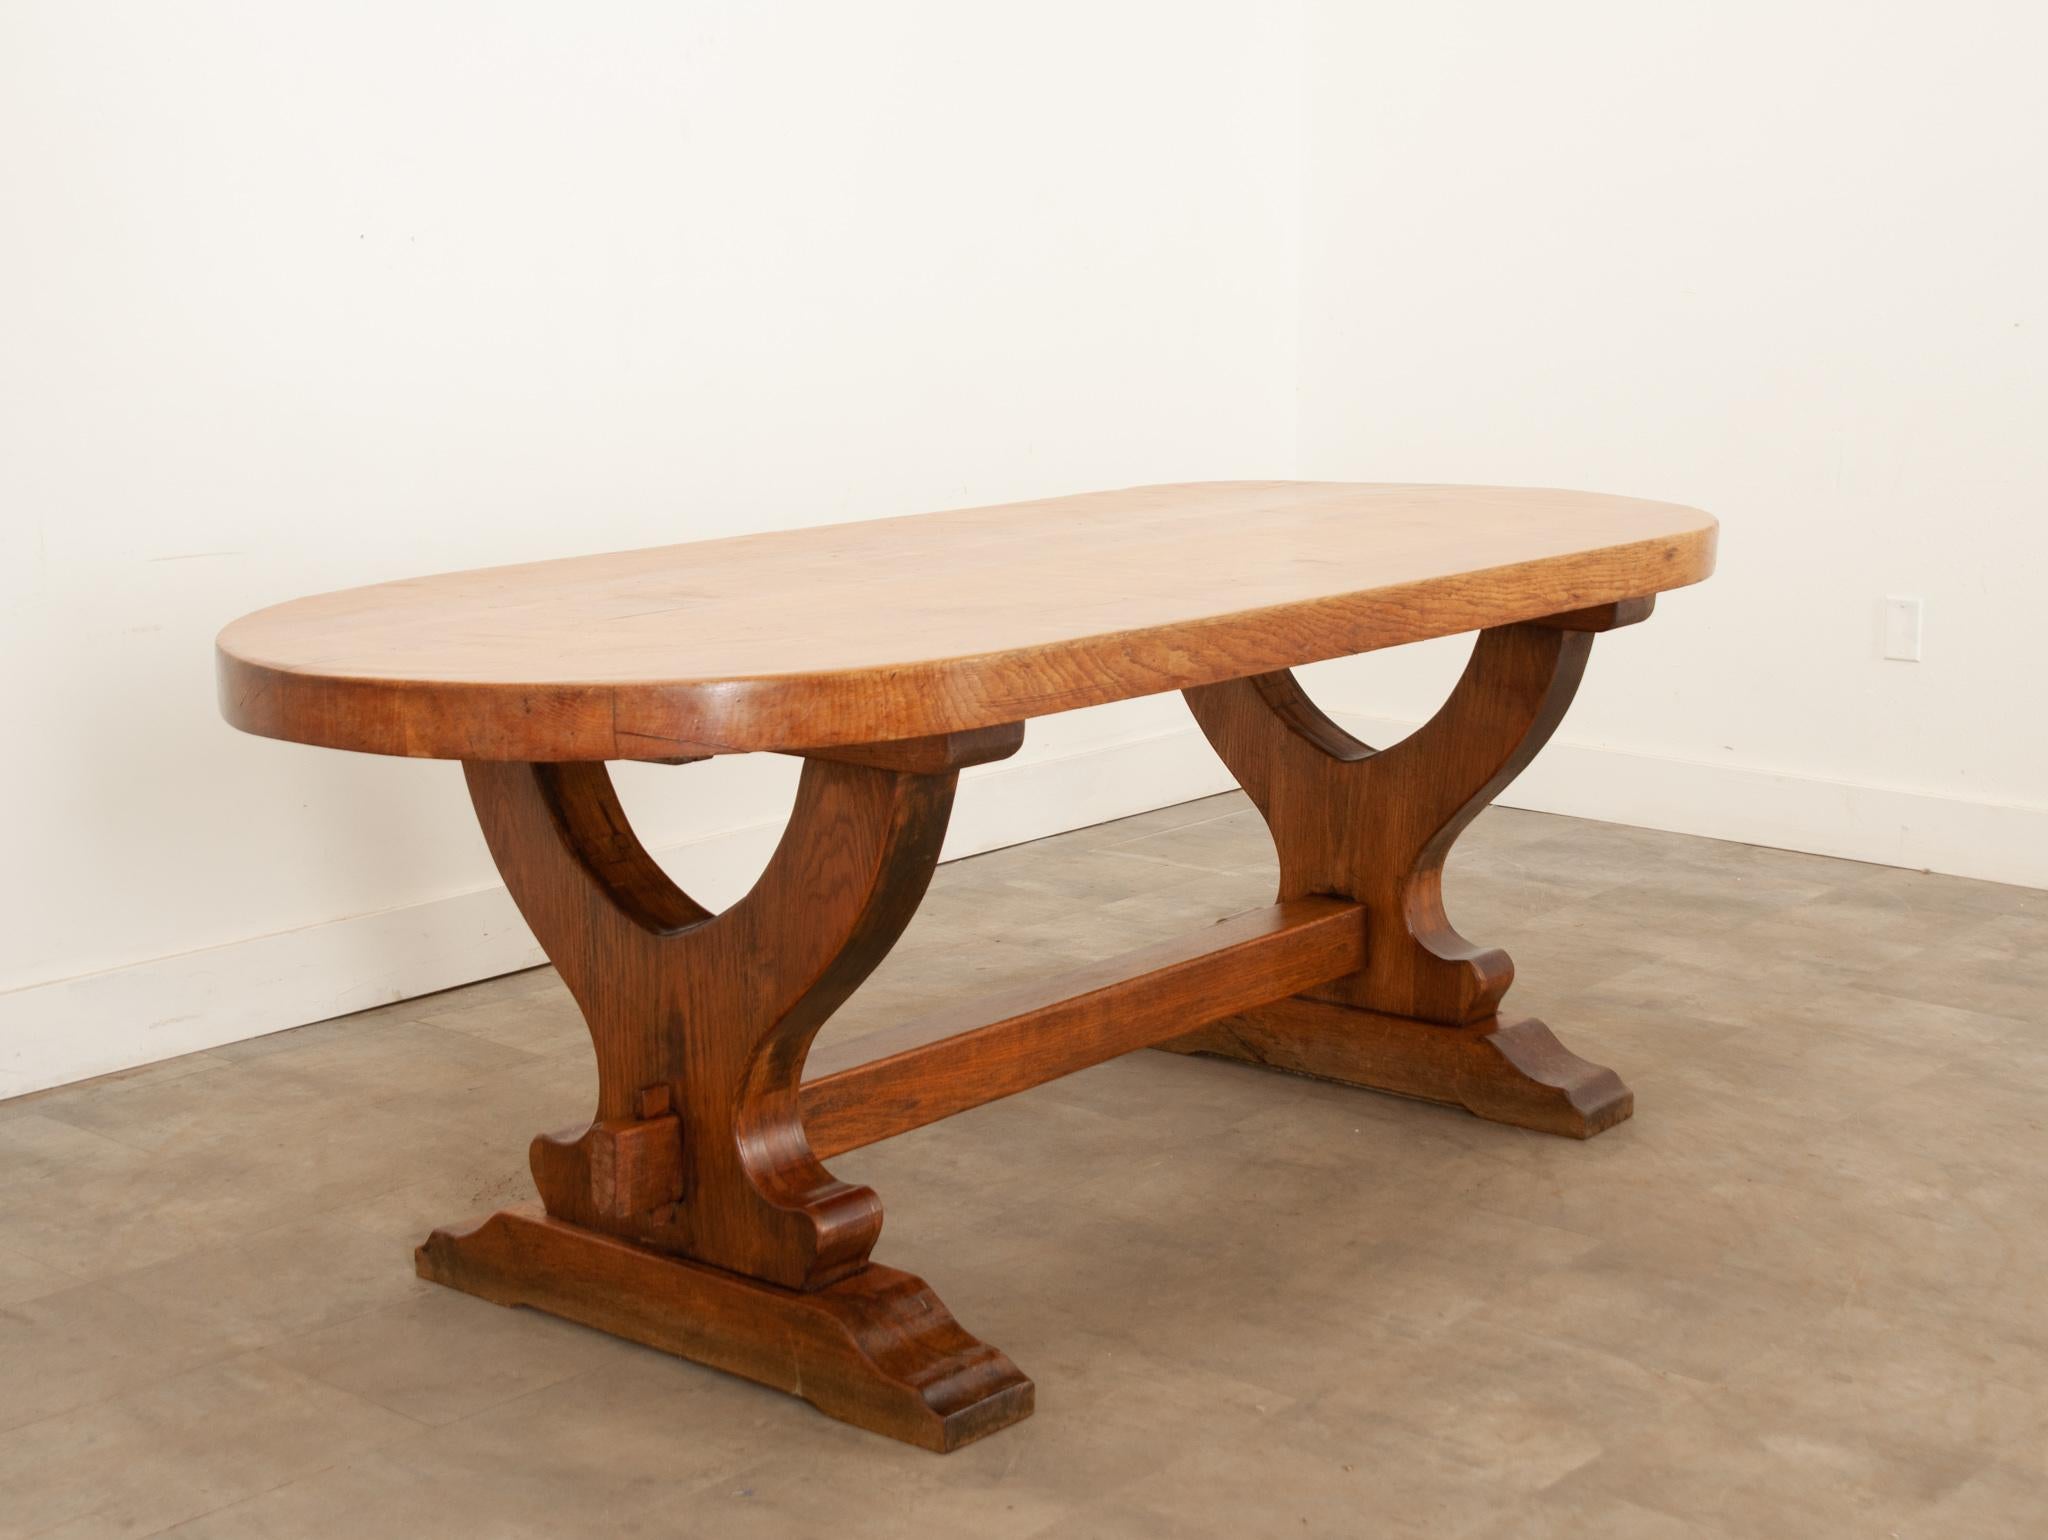 A French dining table from the early 1900s with a thick oak top and trestle base. At over 2-½” thick, the impressive top has a capsule shape and rests atop a substantial oak trestle base. This unique table would be wonderful in a breakfast or dining